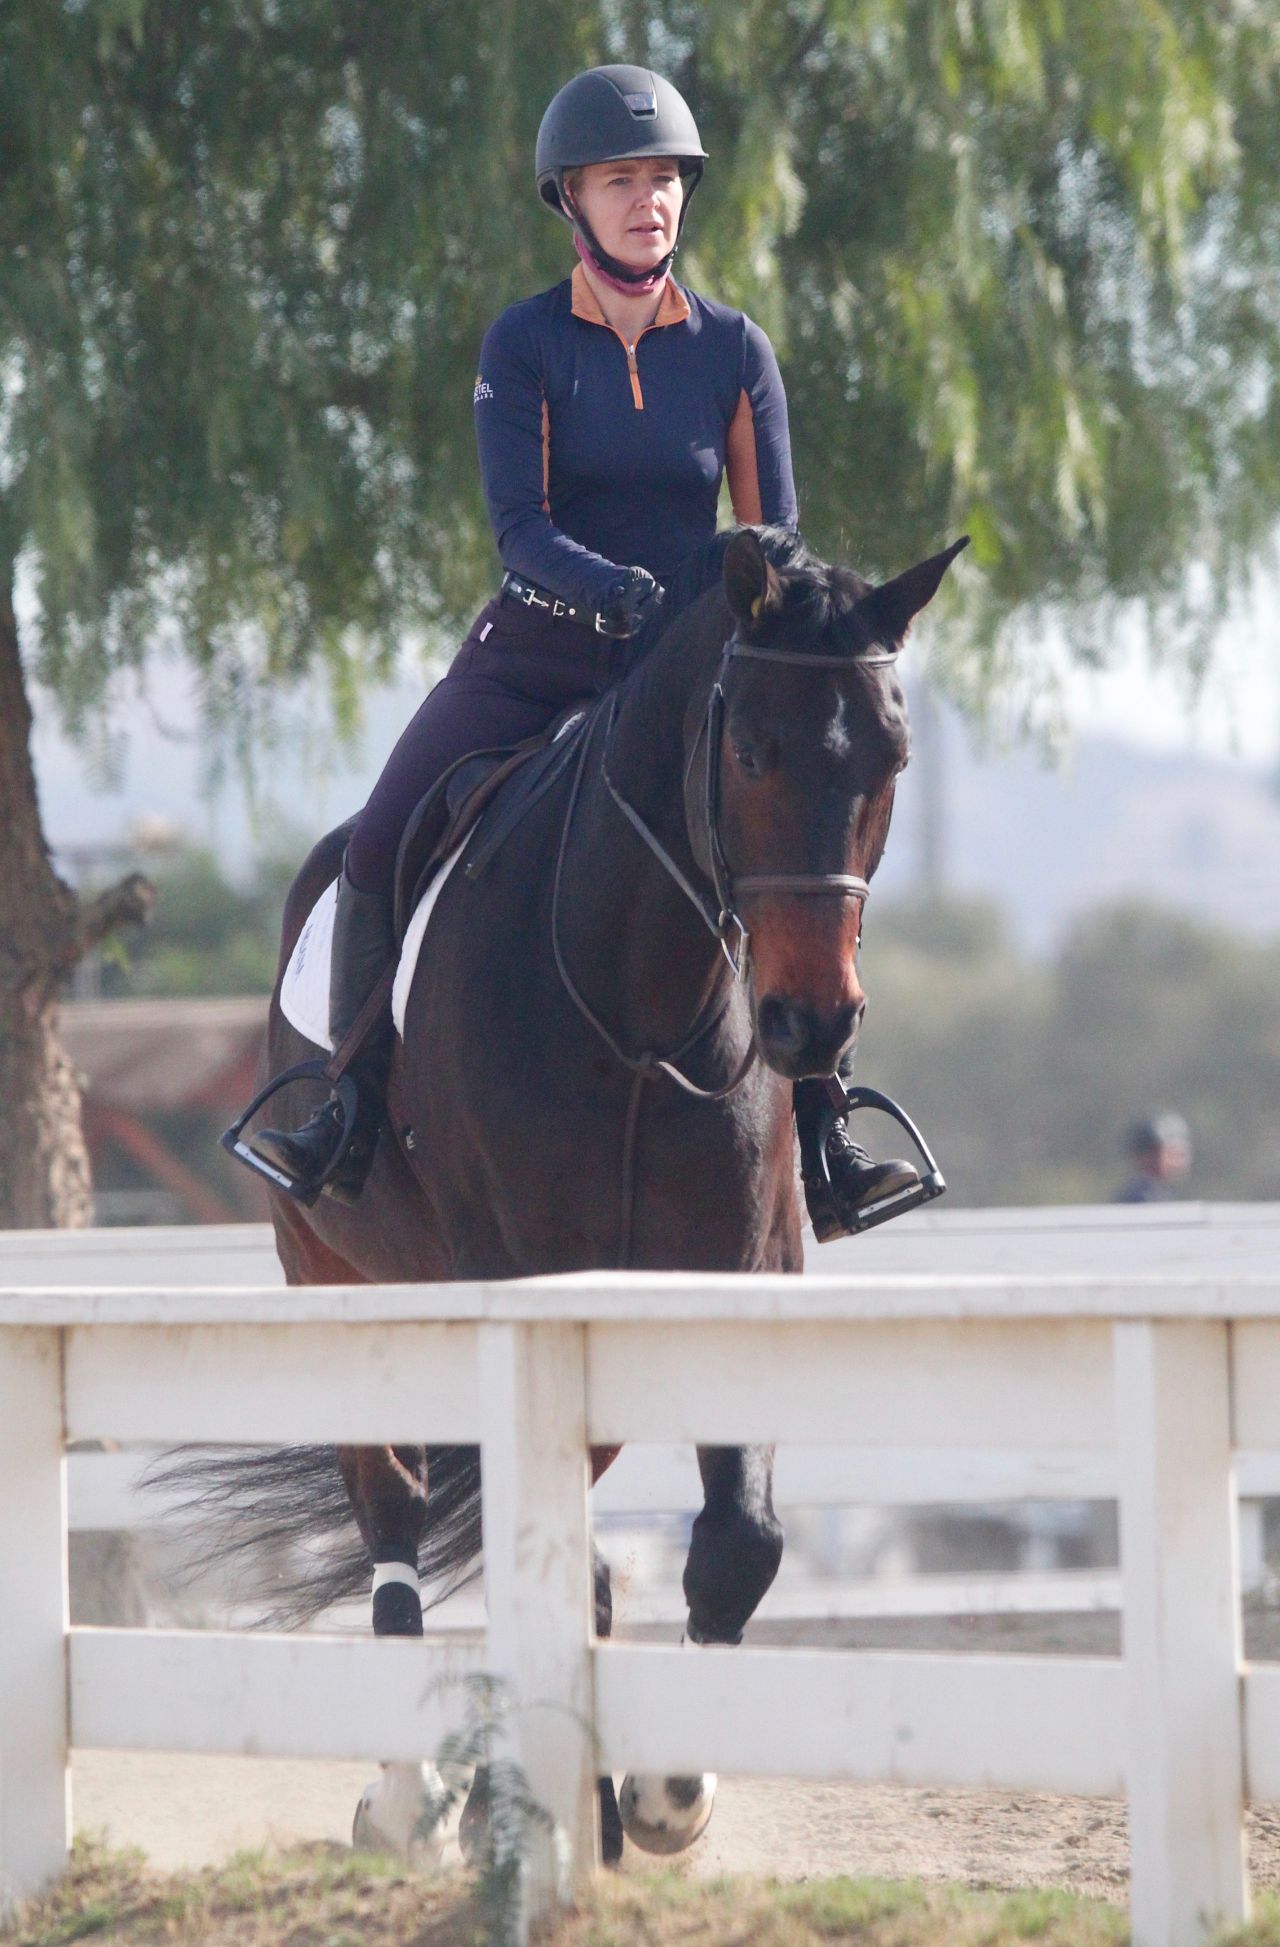 Erewhon – gear Madix Pictured Equestrian Ariana Grocers at in